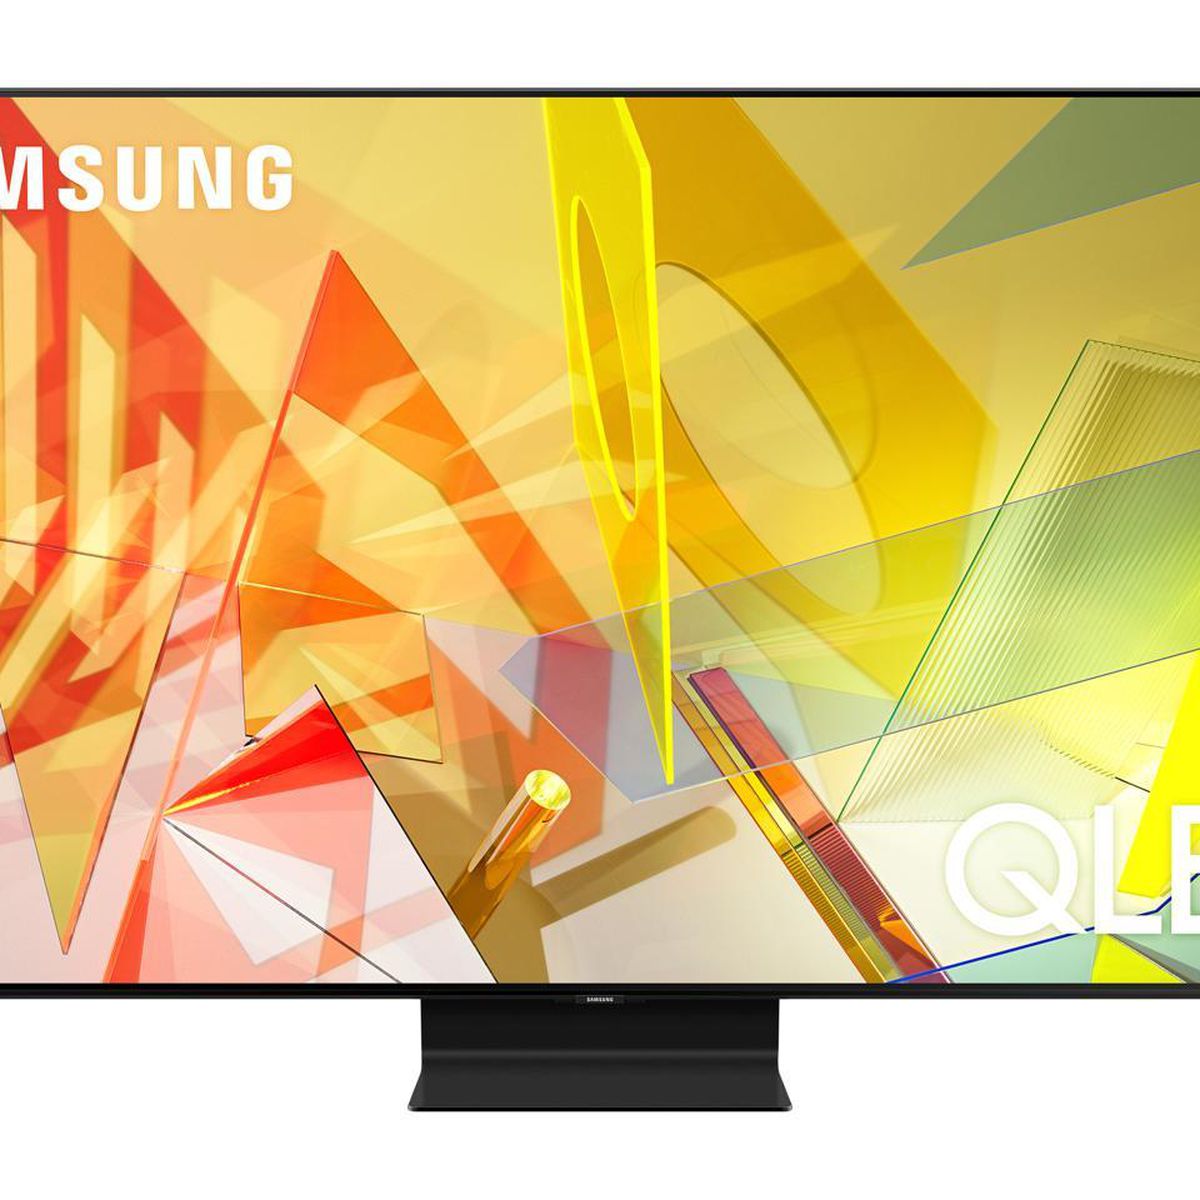 a product shot of thee Samsung Q90T 4K TV